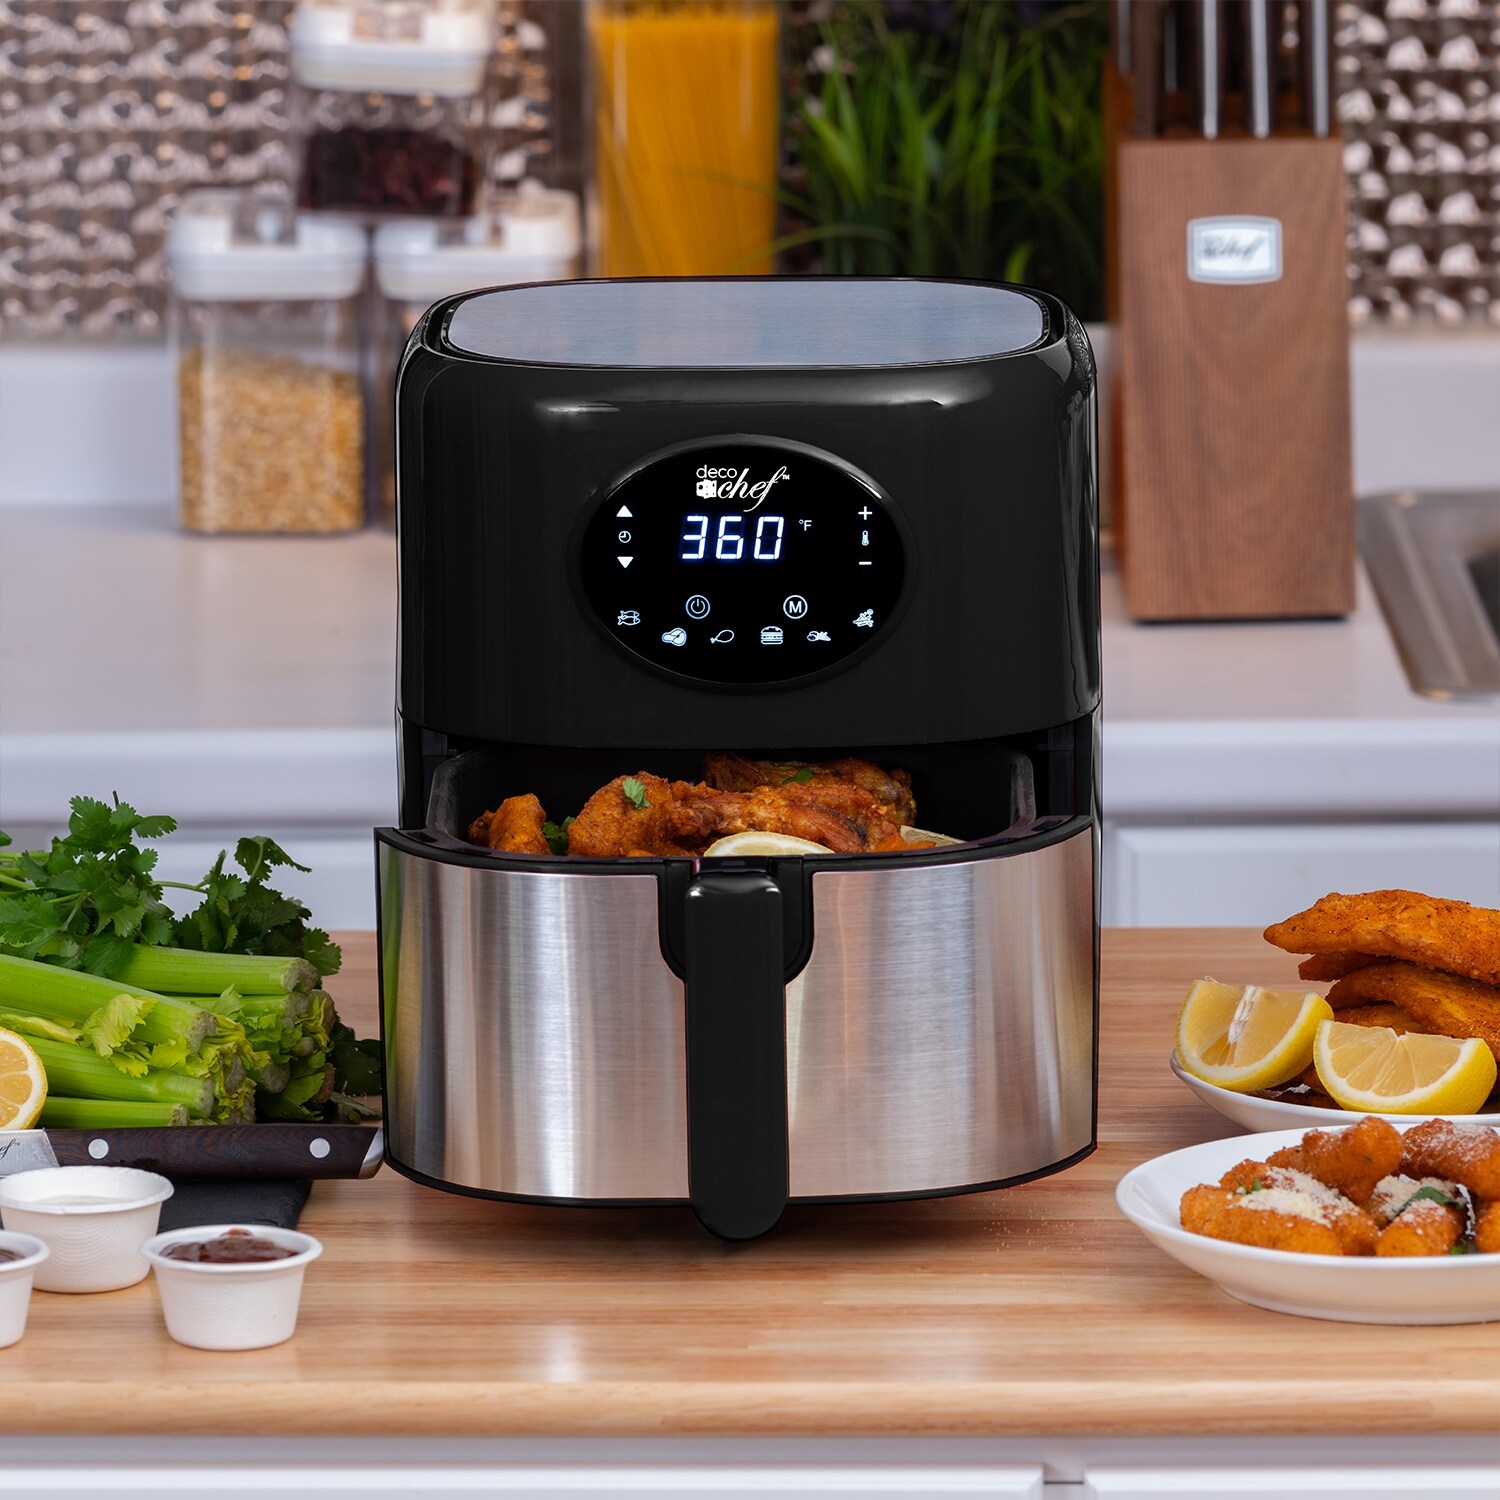 https://ak1.ostkcdn.com/images/products/is/images/direct/a0b53c0345a56d24d80098a2554b07ac1f599c7e/Deco-Chef-3.7QT-Digital-Air-Fryer-with-6-Cooking-Presets%2C-Dishwasher-Safe-Basket.jpg